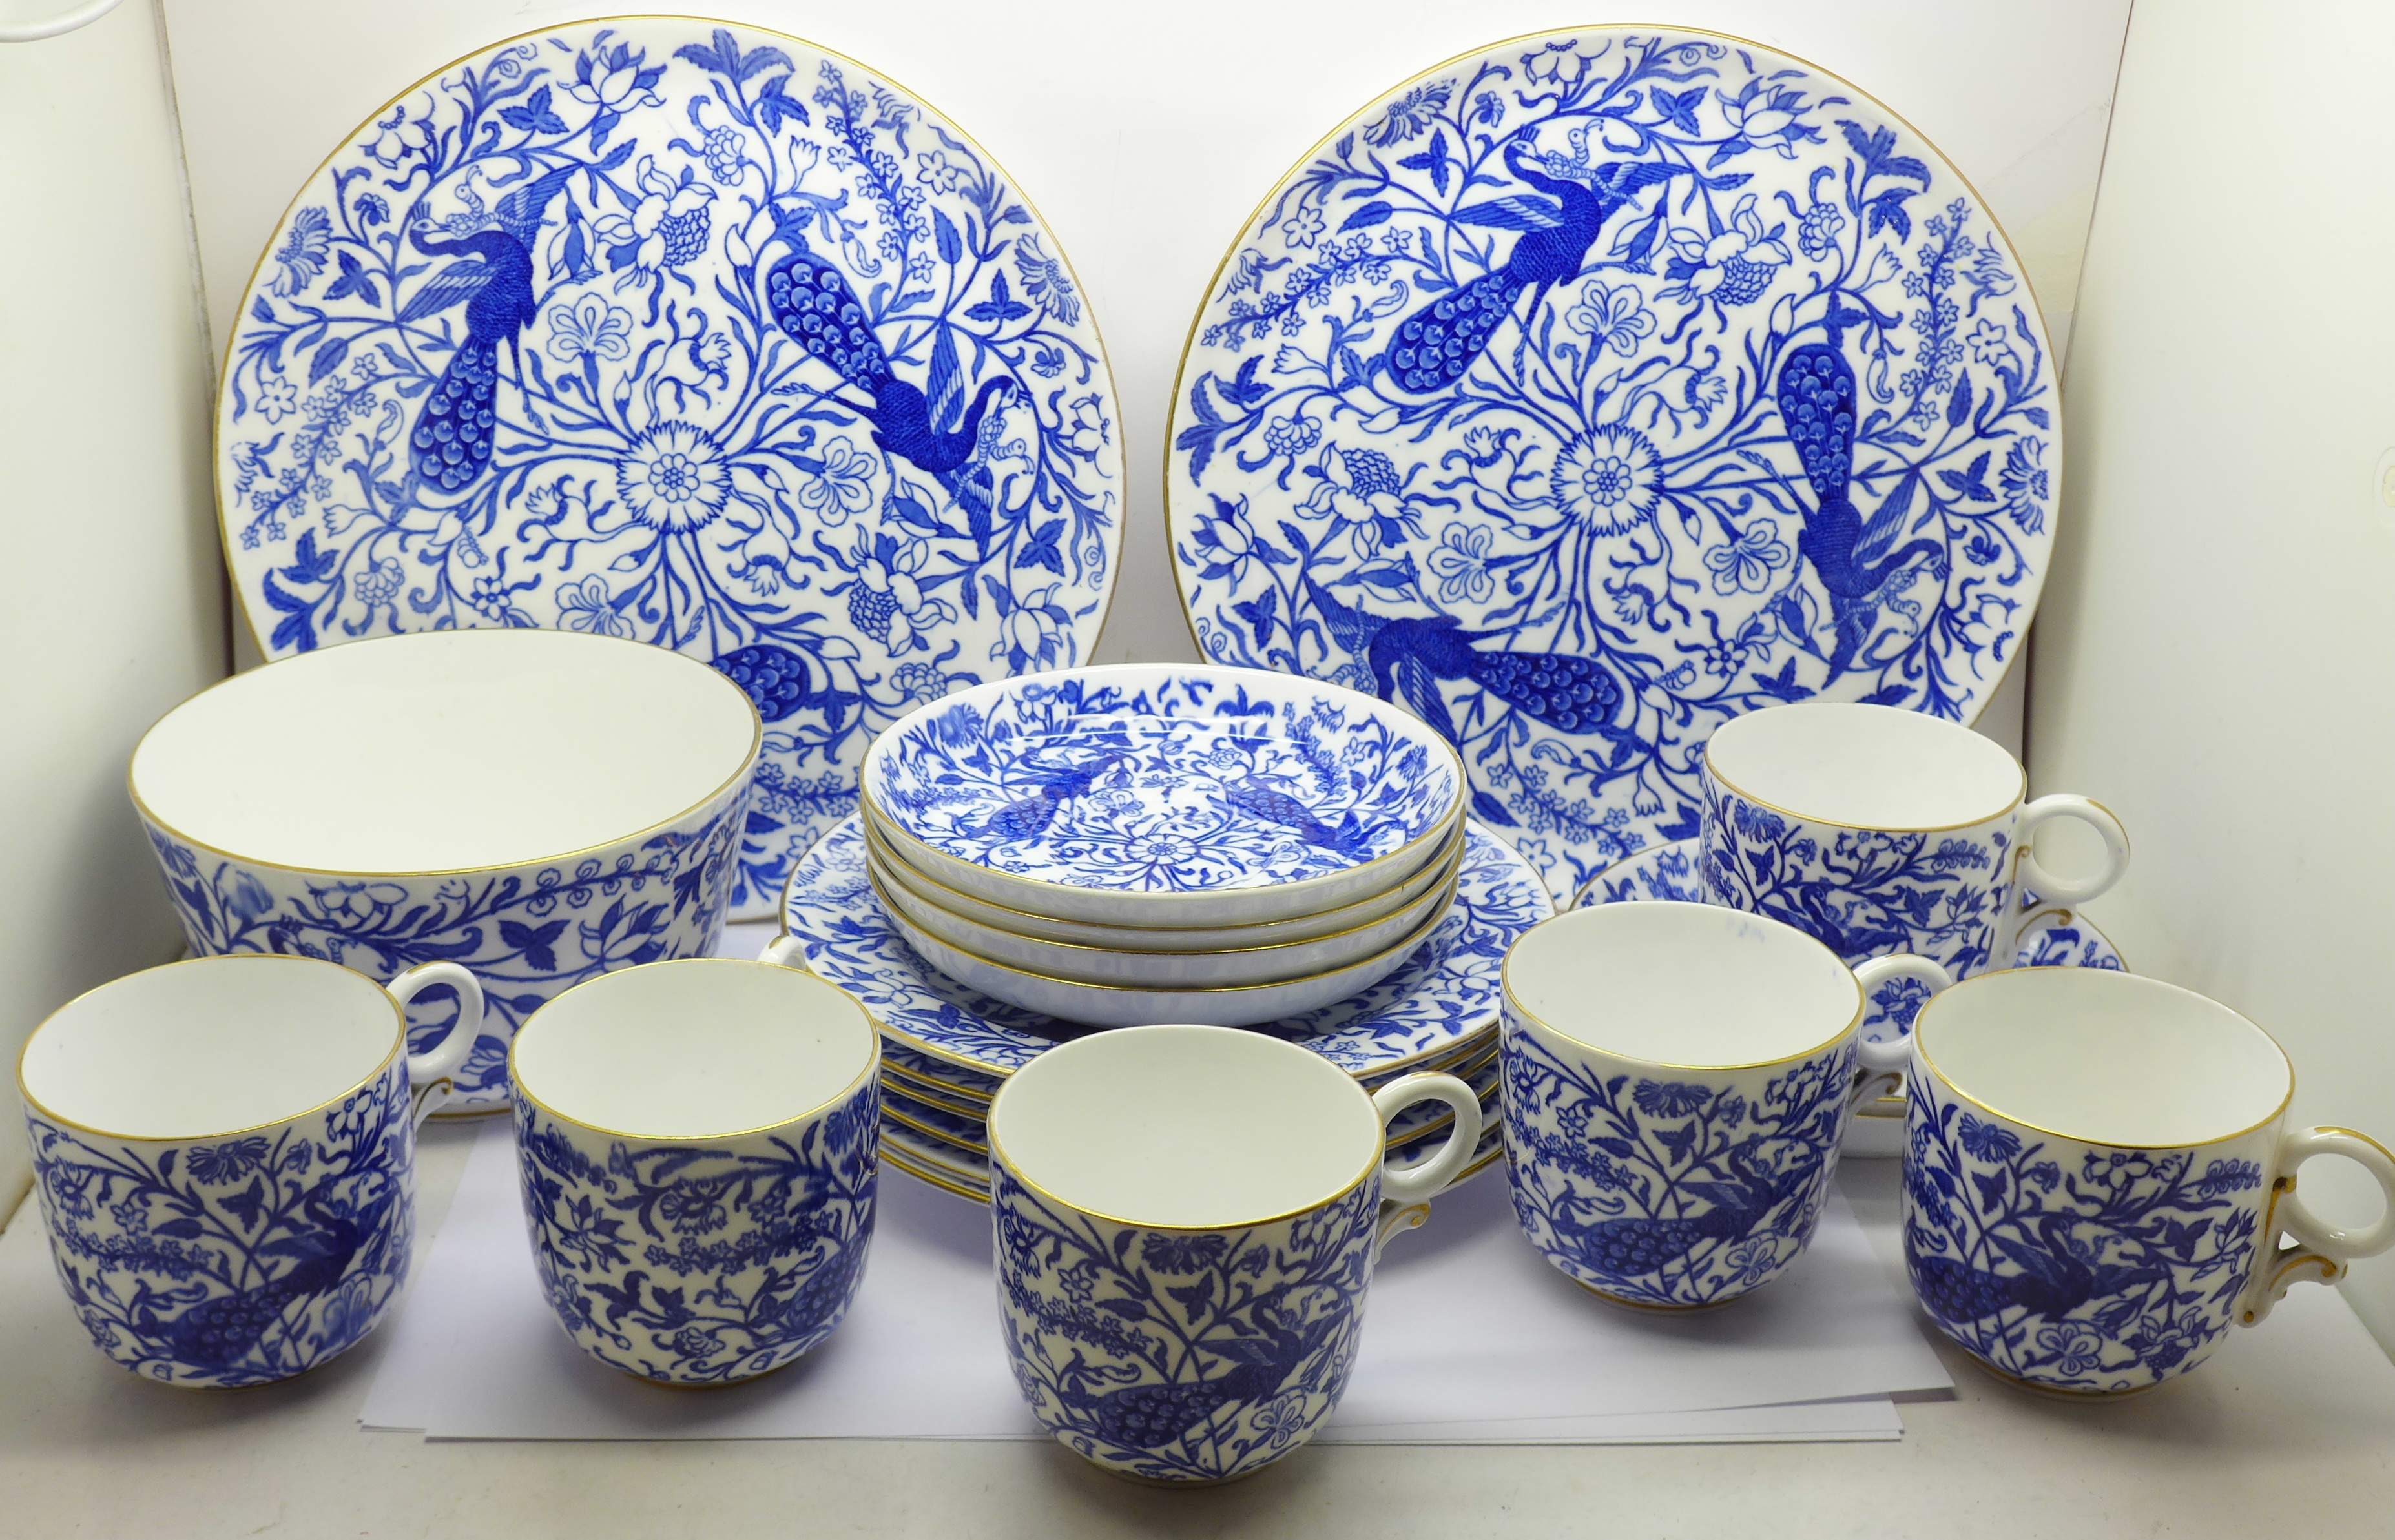 A Derby porcelain six setting tea set with two cake plates and sugar bowl, plates with impressed